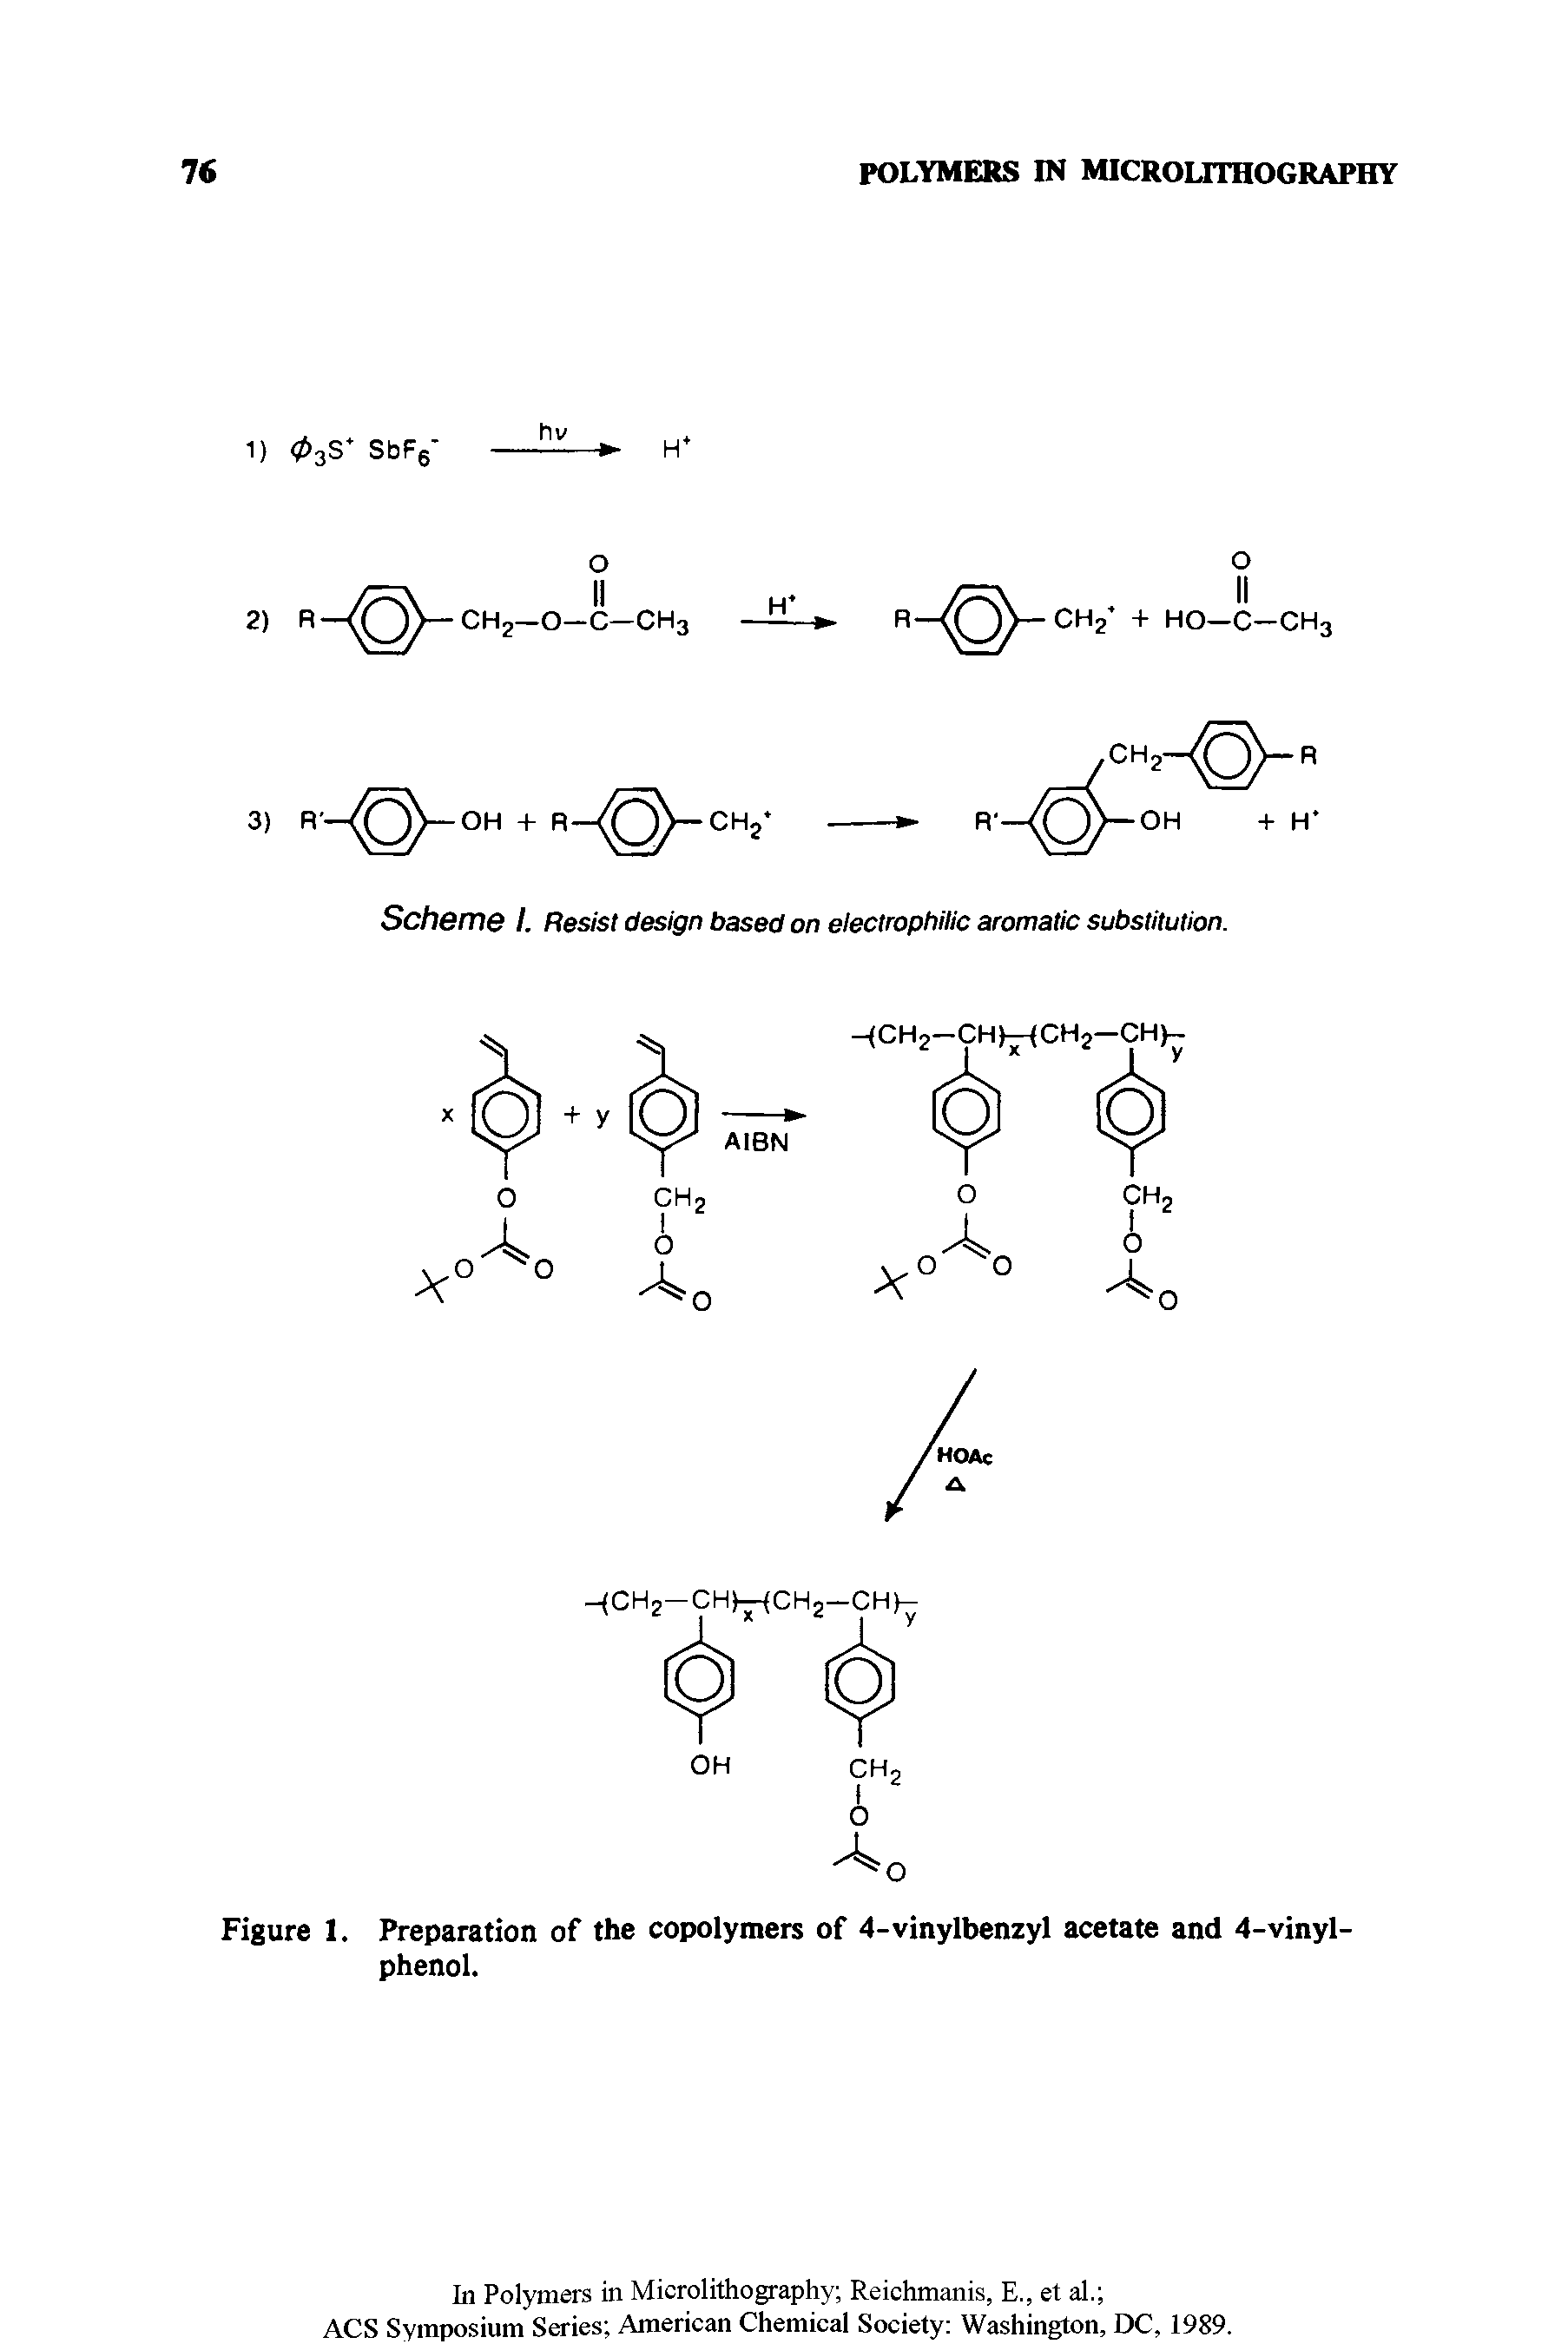 Figure 1. Preparation of the copolymers of 4-vinylbenzyl acetate and 4-vinyl-phenol.